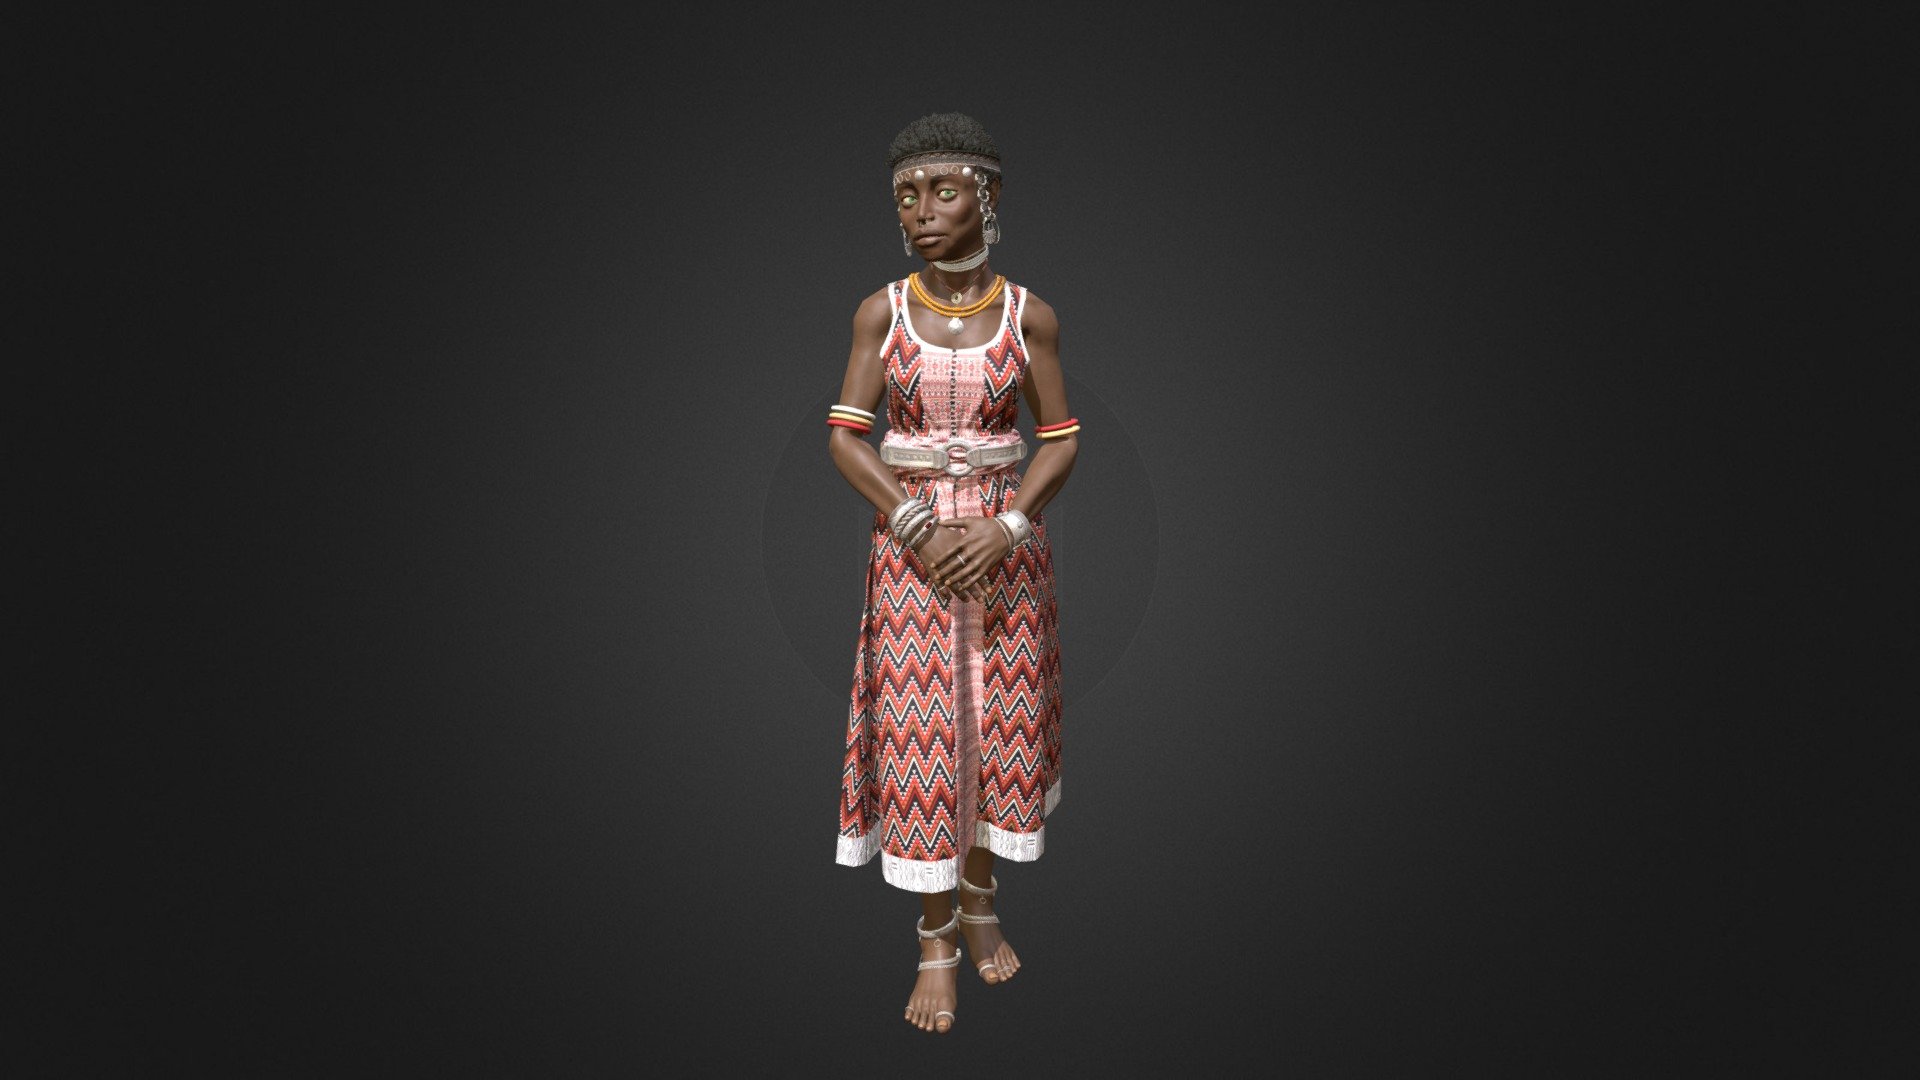 This is an attempt to create an original character. The design is a mixture of cultural styles from Eastern Europe, East Africa and India 3d model